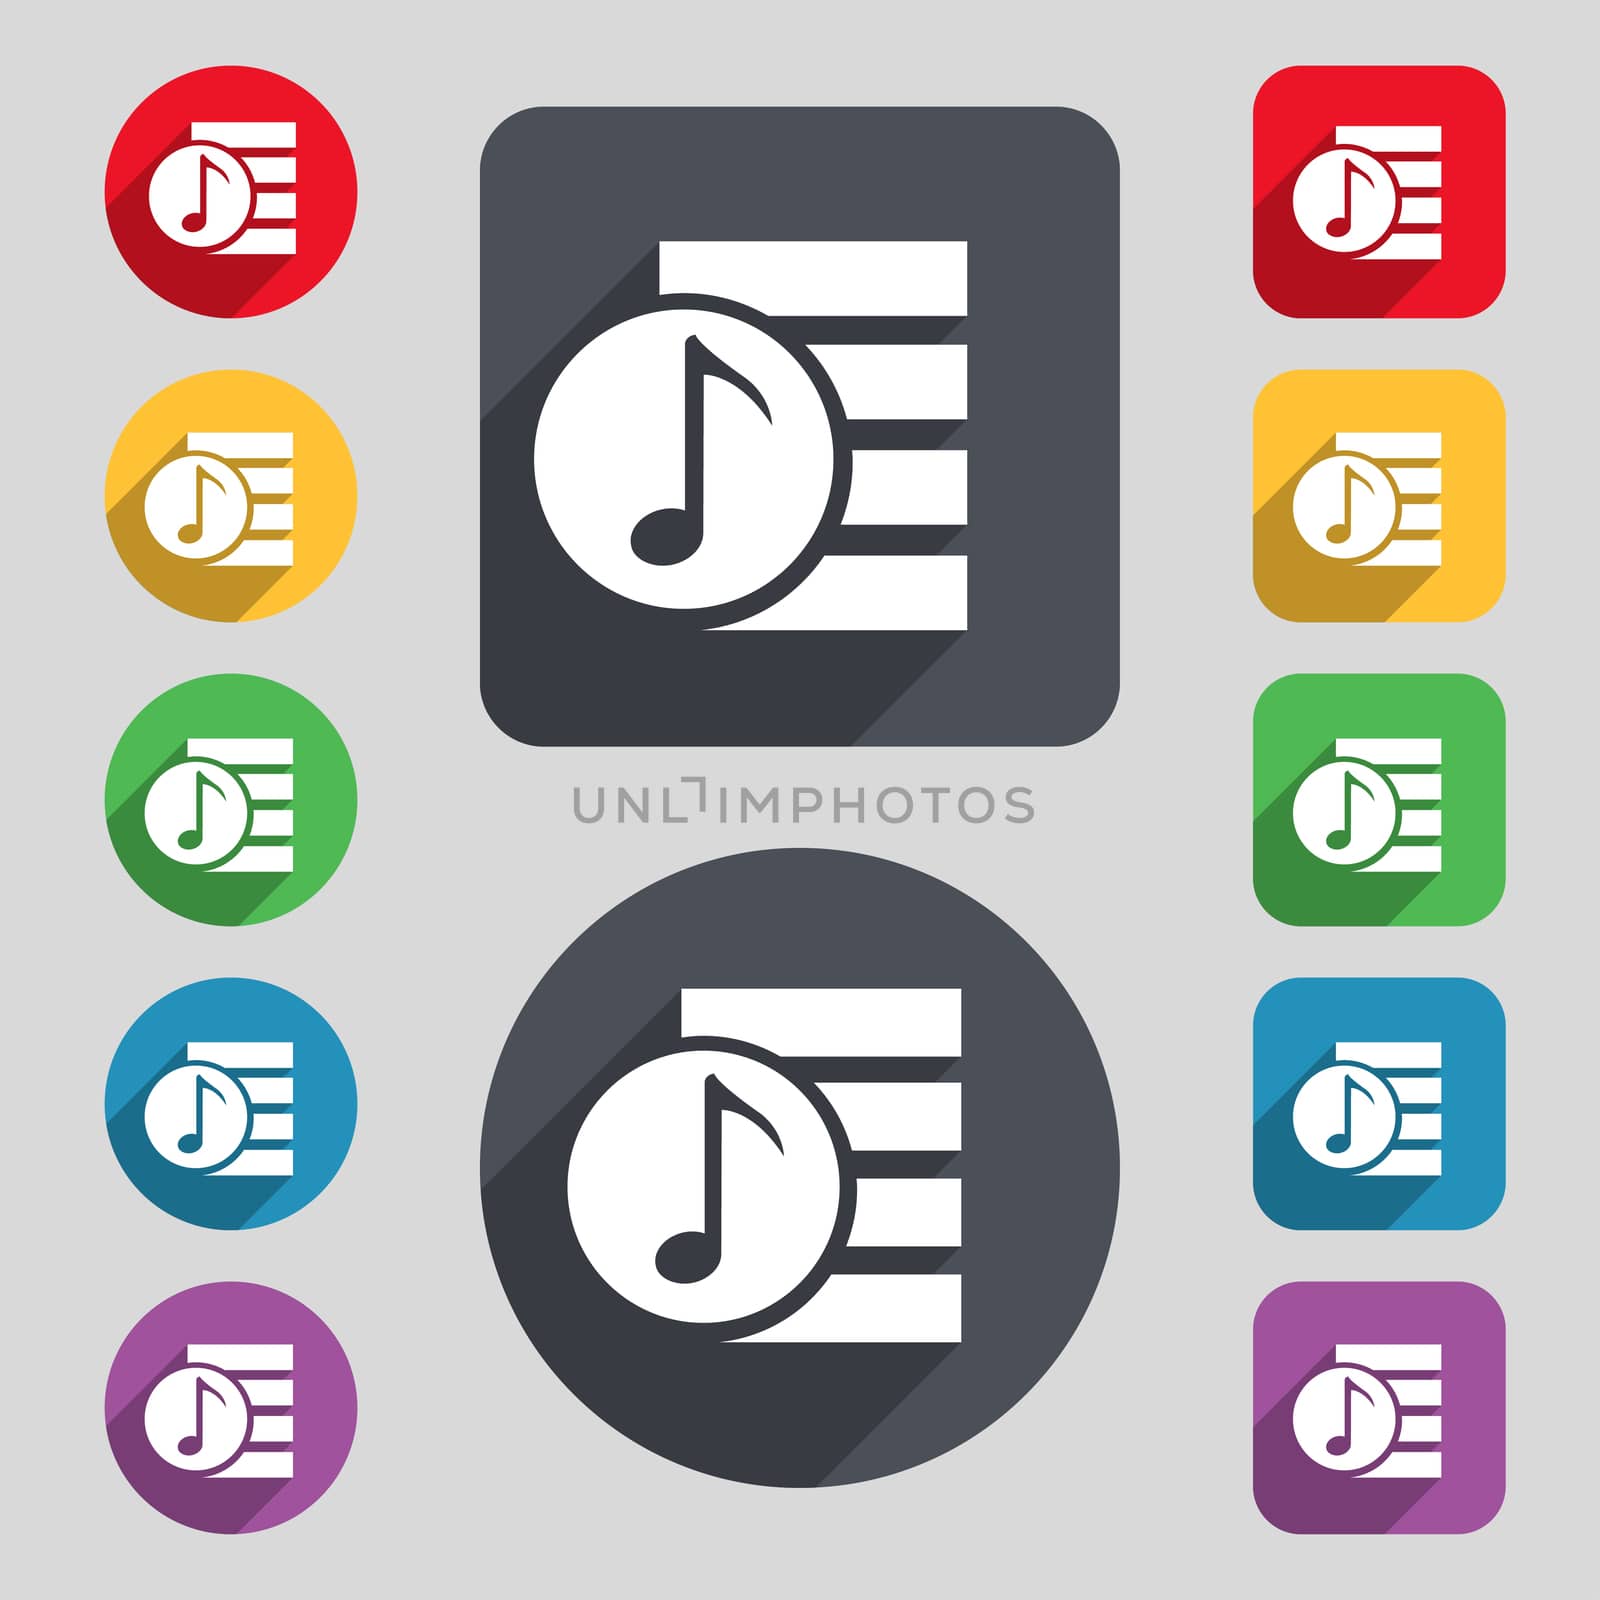 Audio, MP3 file icon sign. A set of 12 colored buttons and a long shadow. Flat design. 